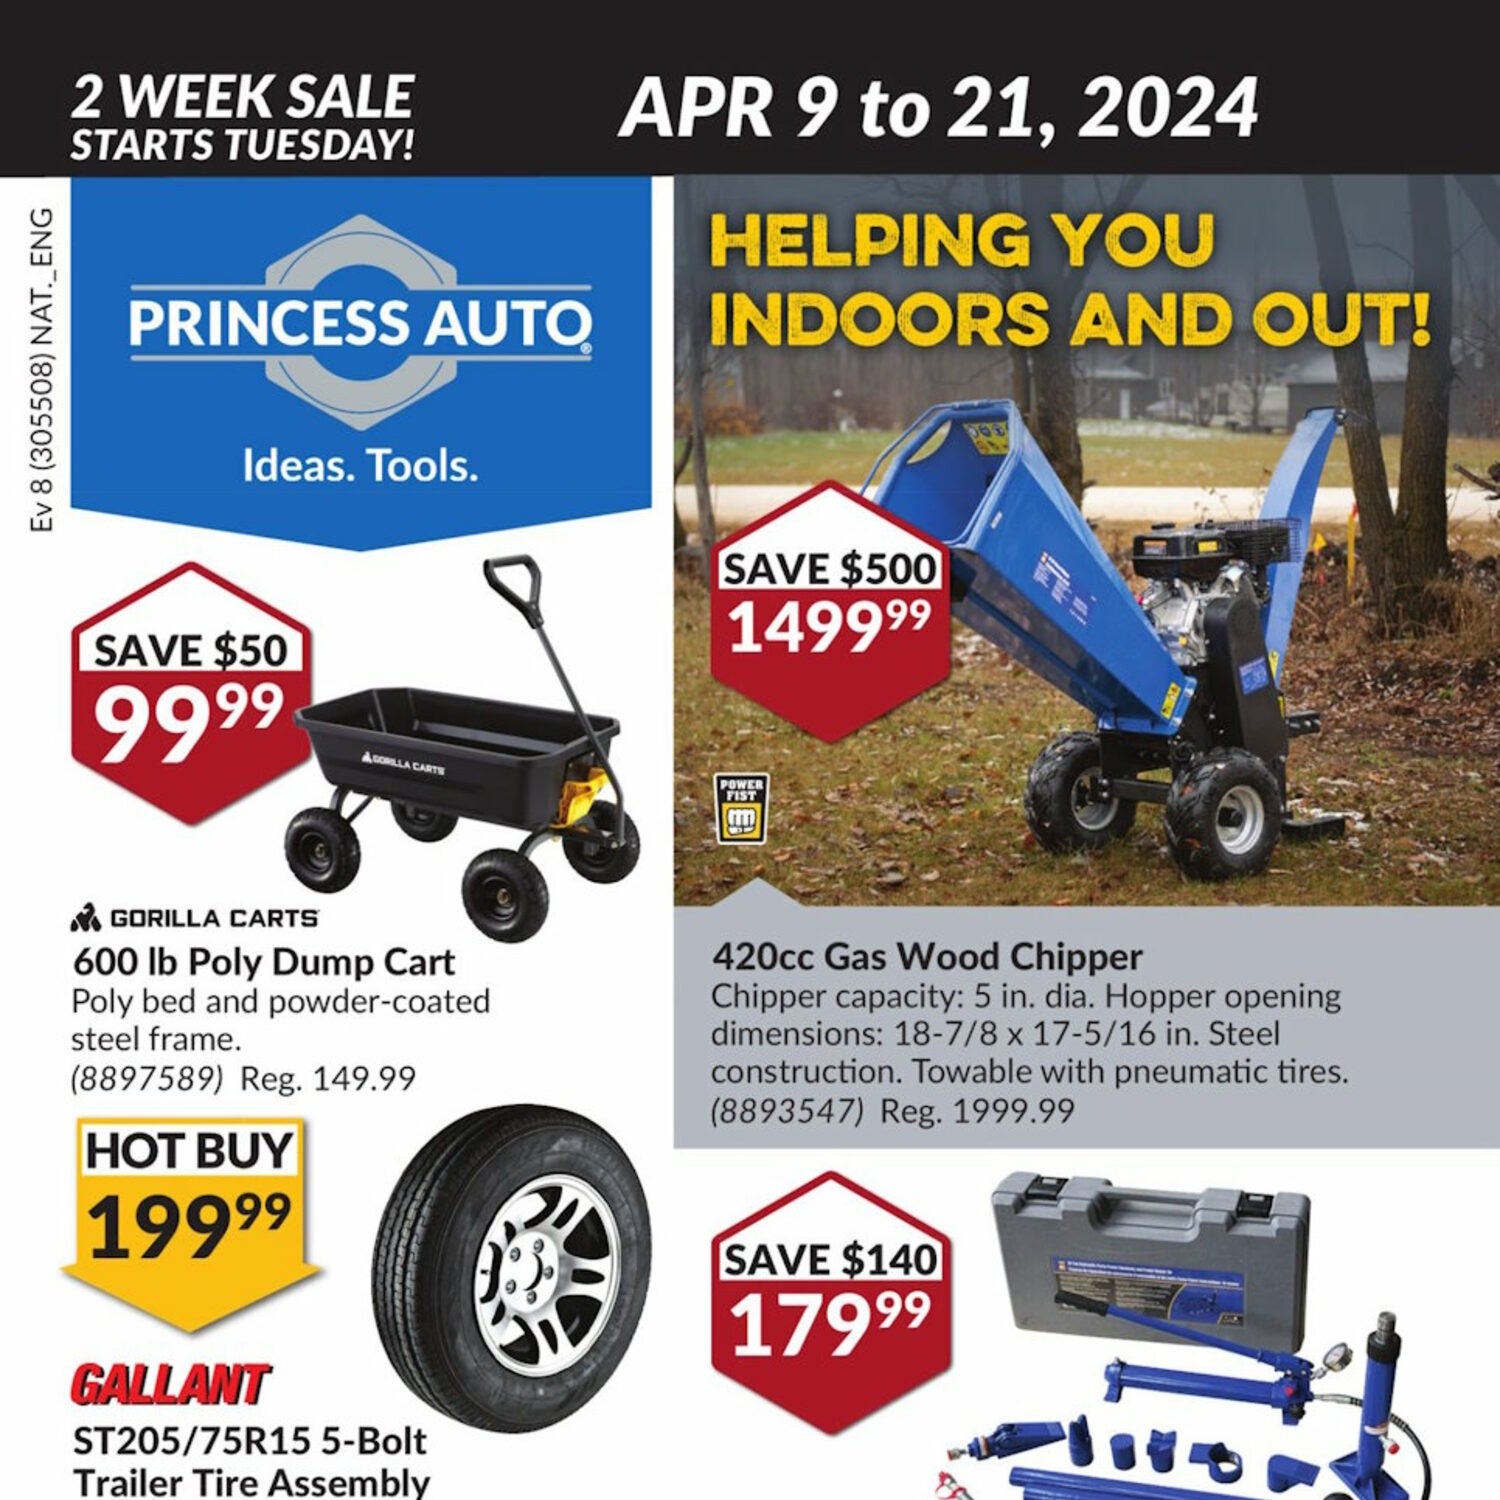 Princess Auto Weekly Flyer - 2 Week Sale - Helping You Indoors & Out - Apr  9 – 21 